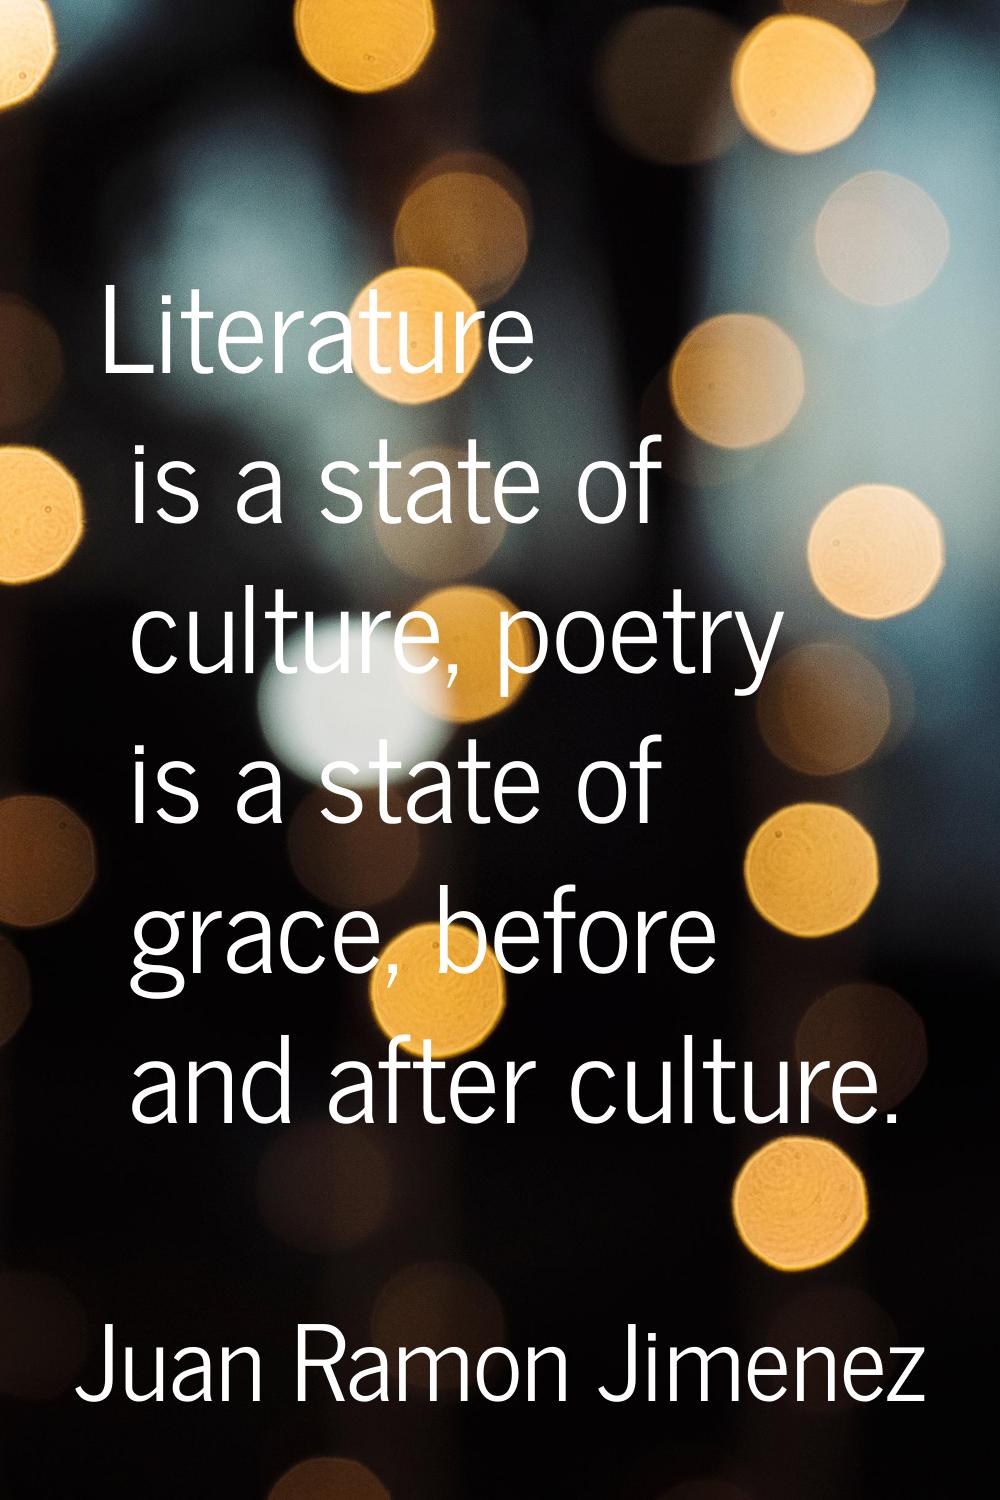 Literature is a state of culture, poetry is a state of grace, before and after culture.